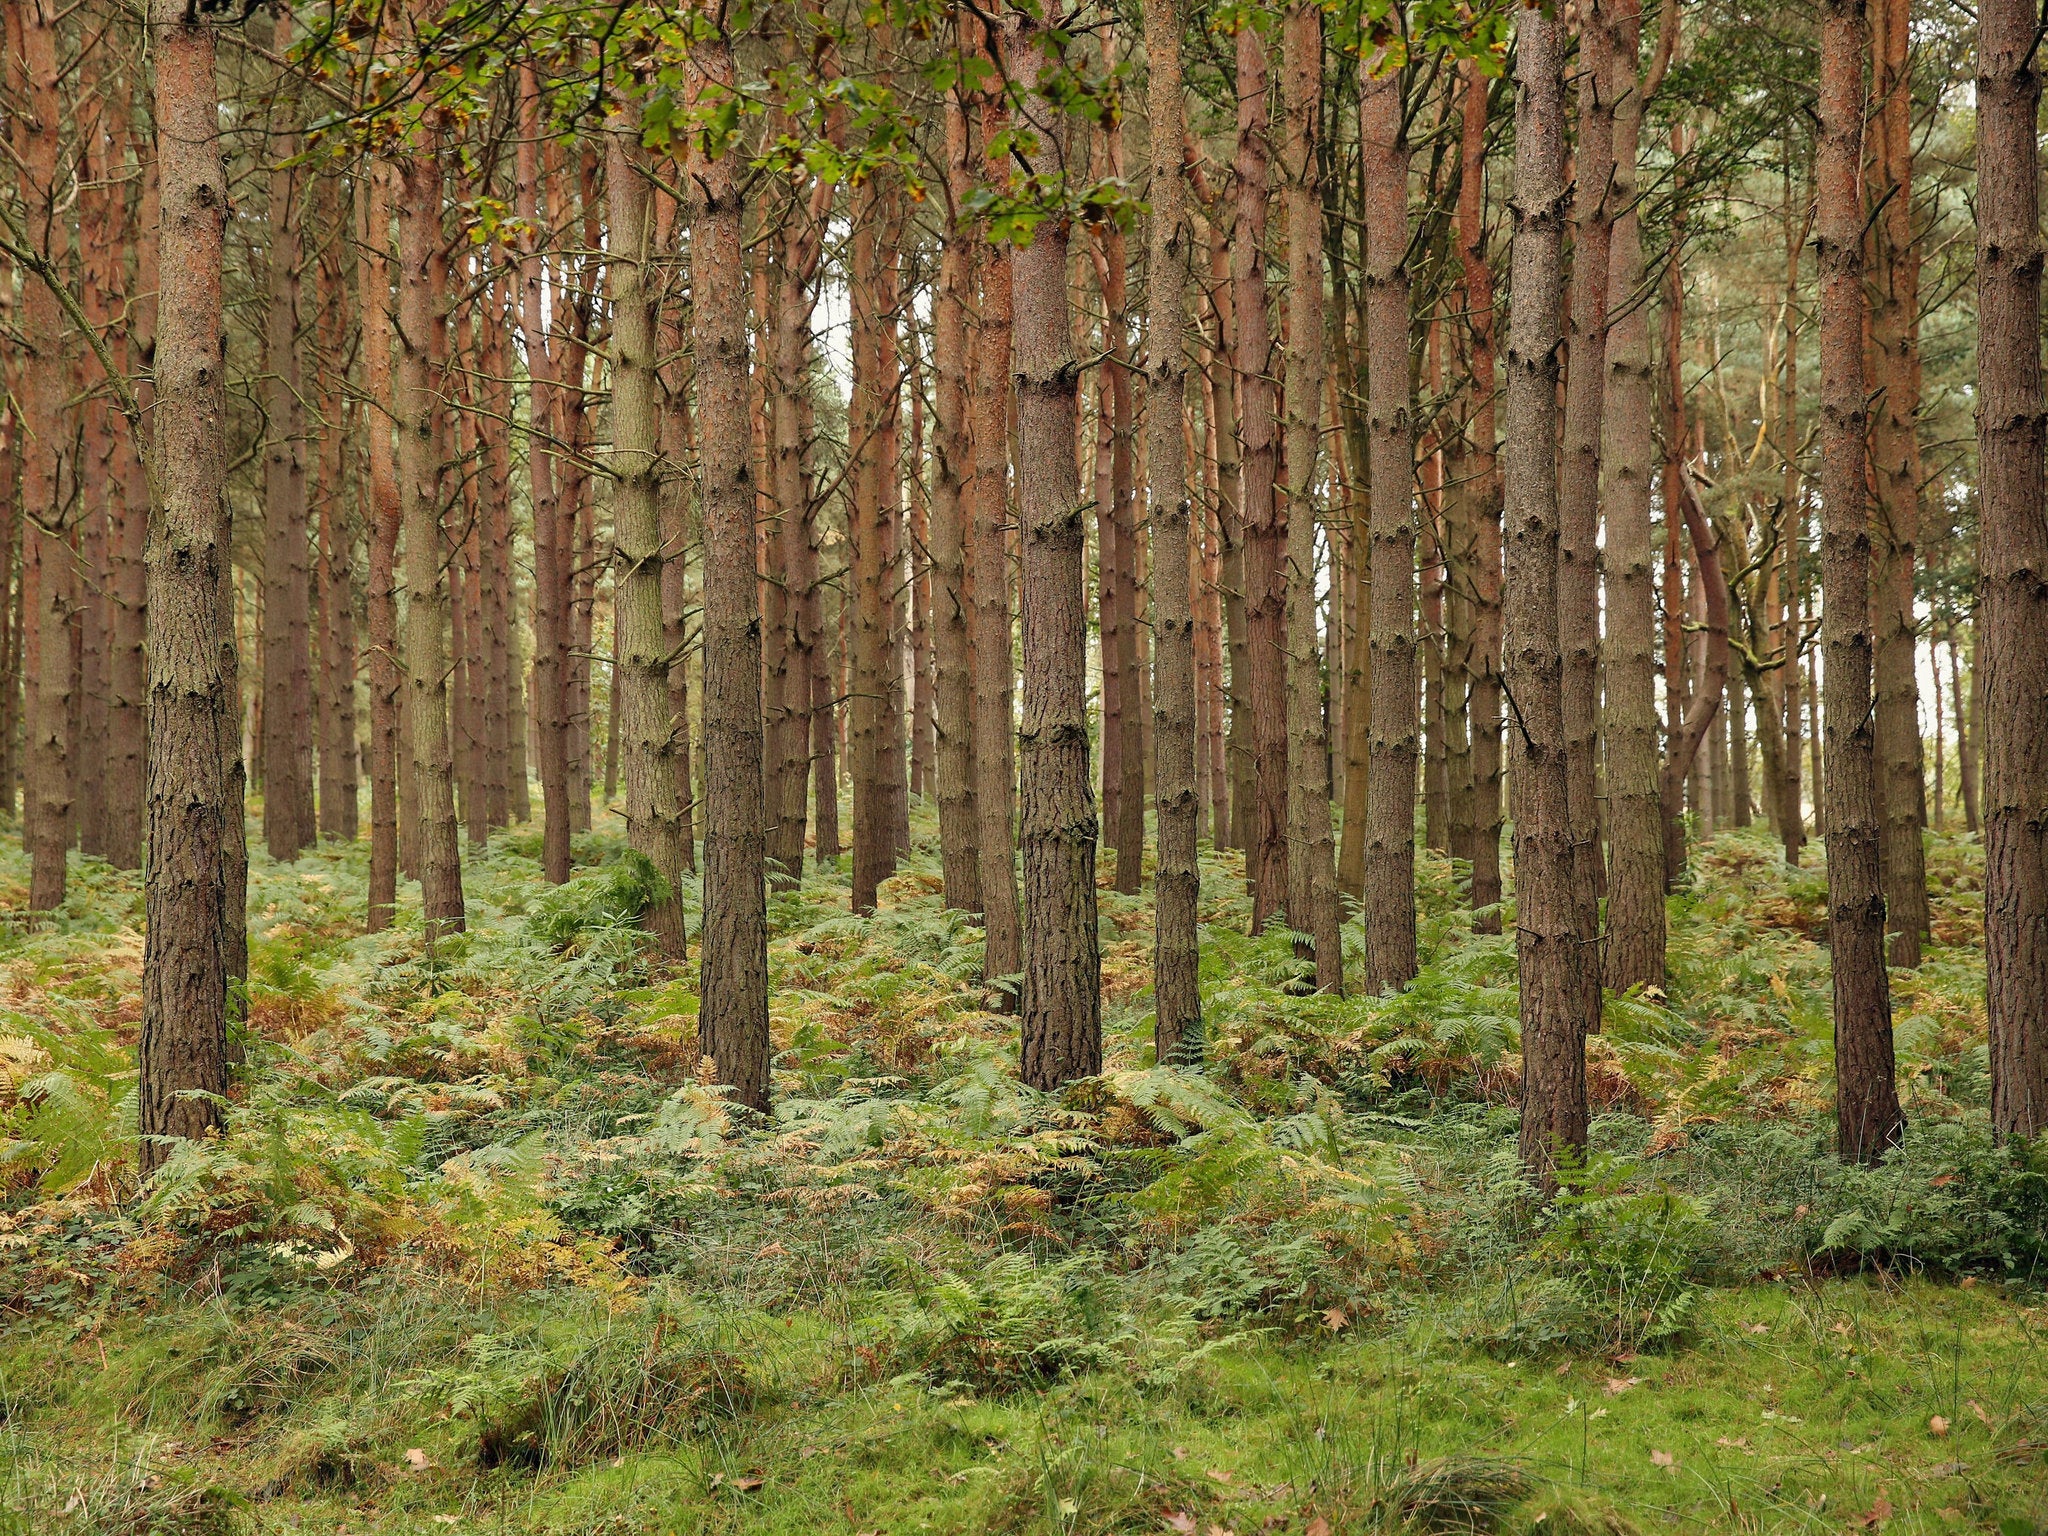 Some of the 3 billion trees in the UK, around 47 for everyone in the country